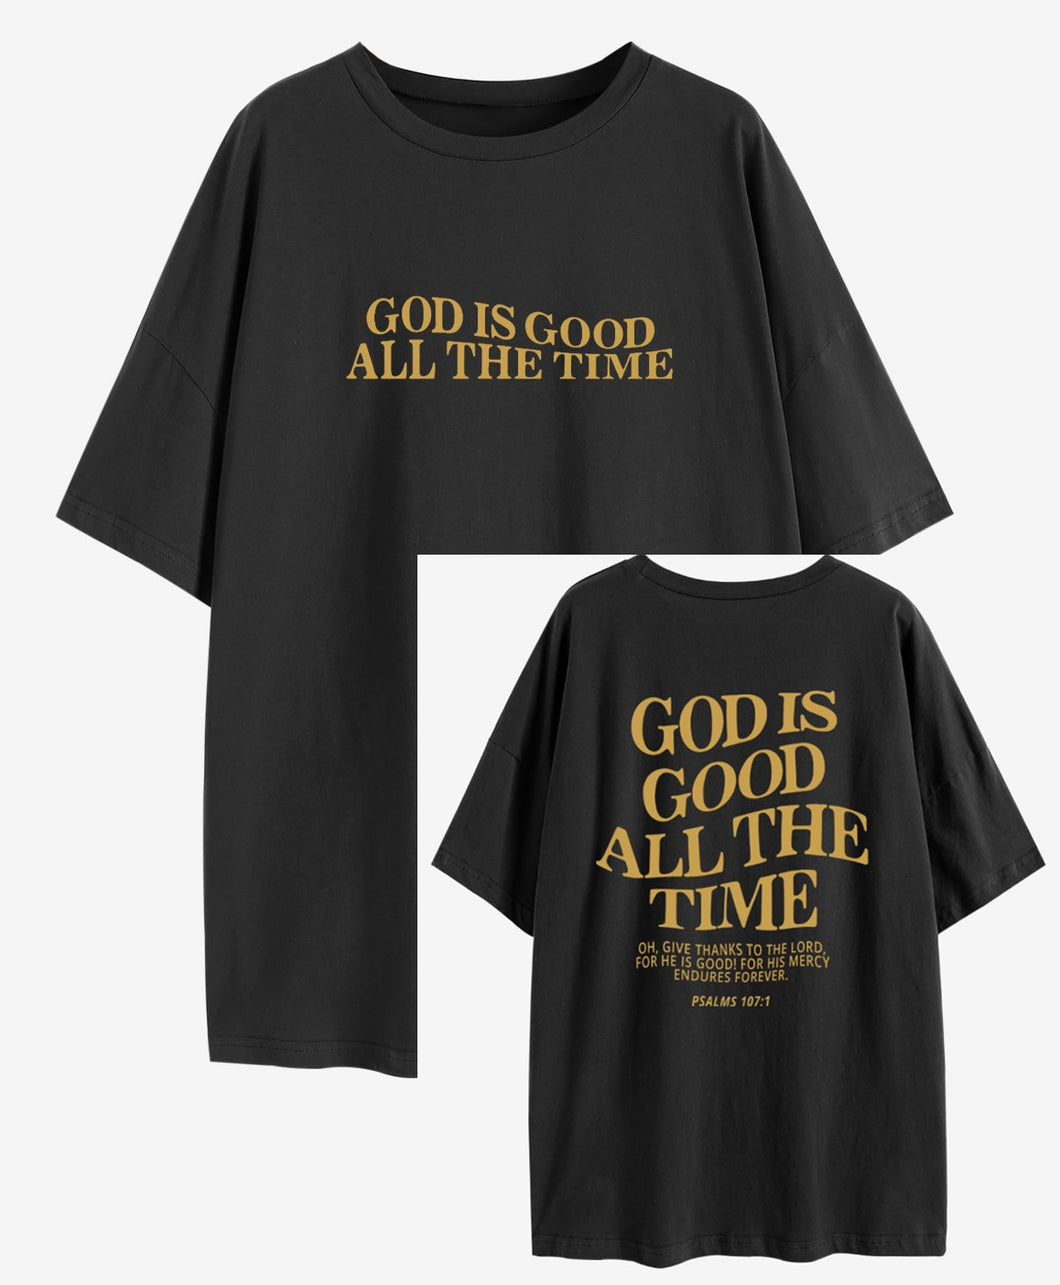 Psalms 107.1 Good All The Time Cotton Tshirt